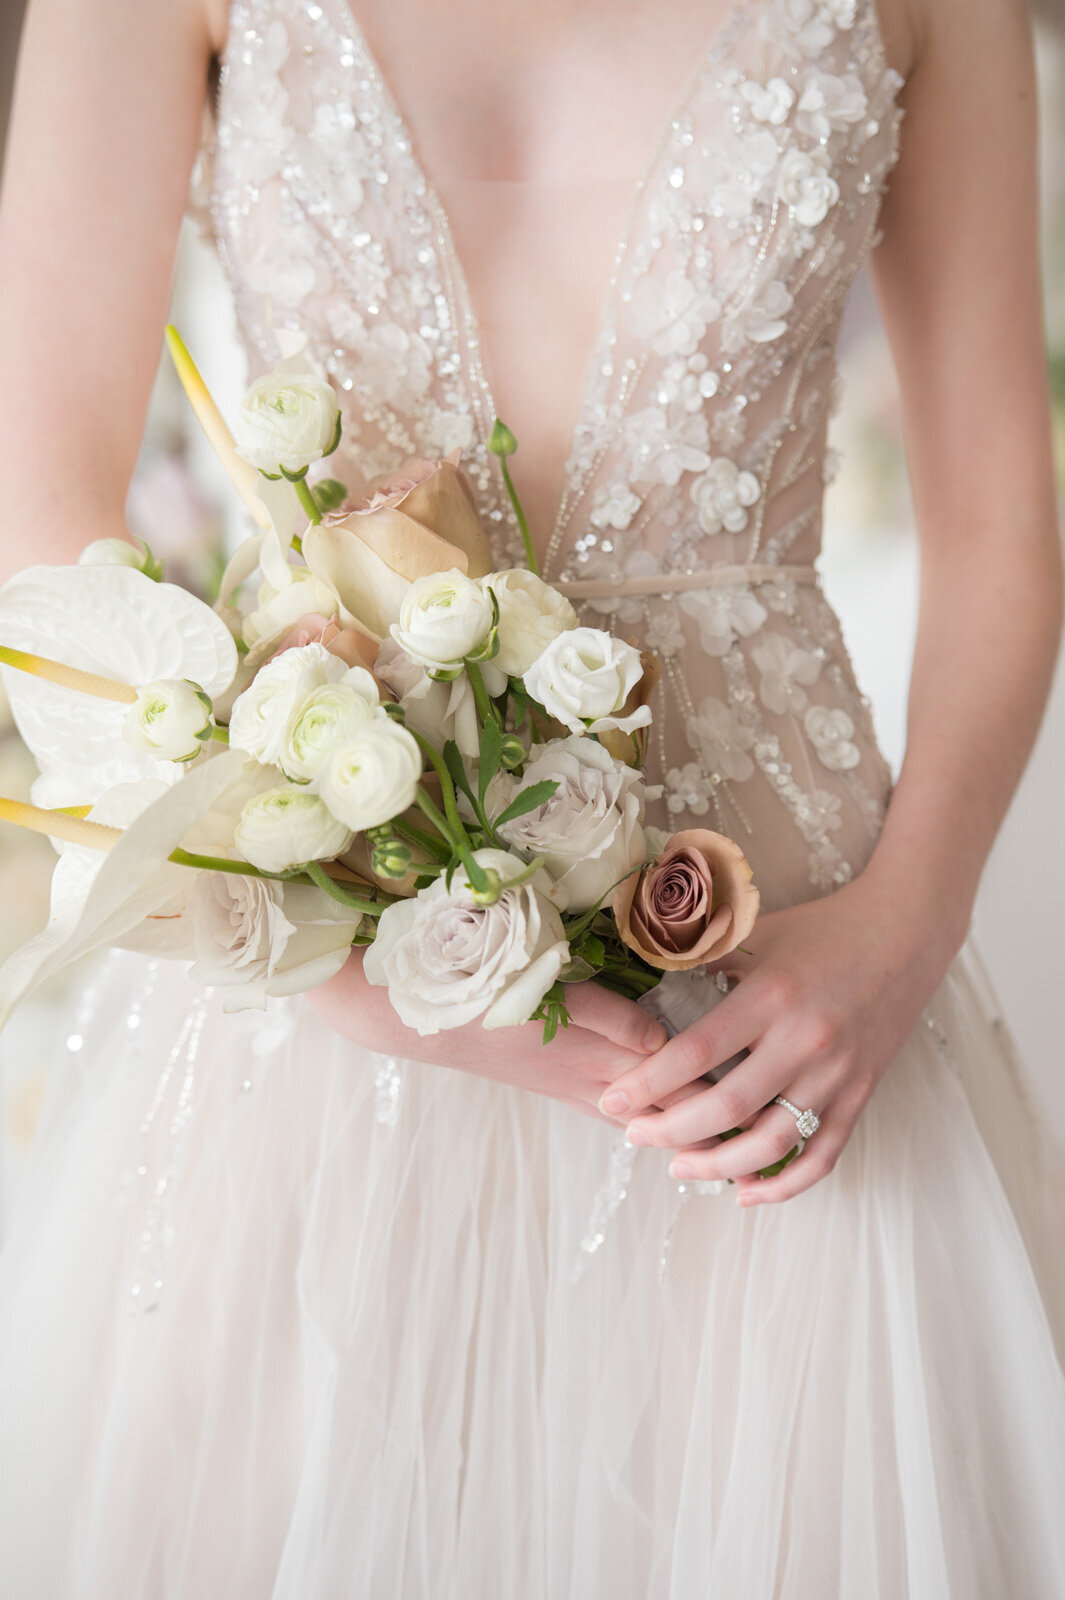 Diana-Pires-Events-Fiore-Wedluxe-14